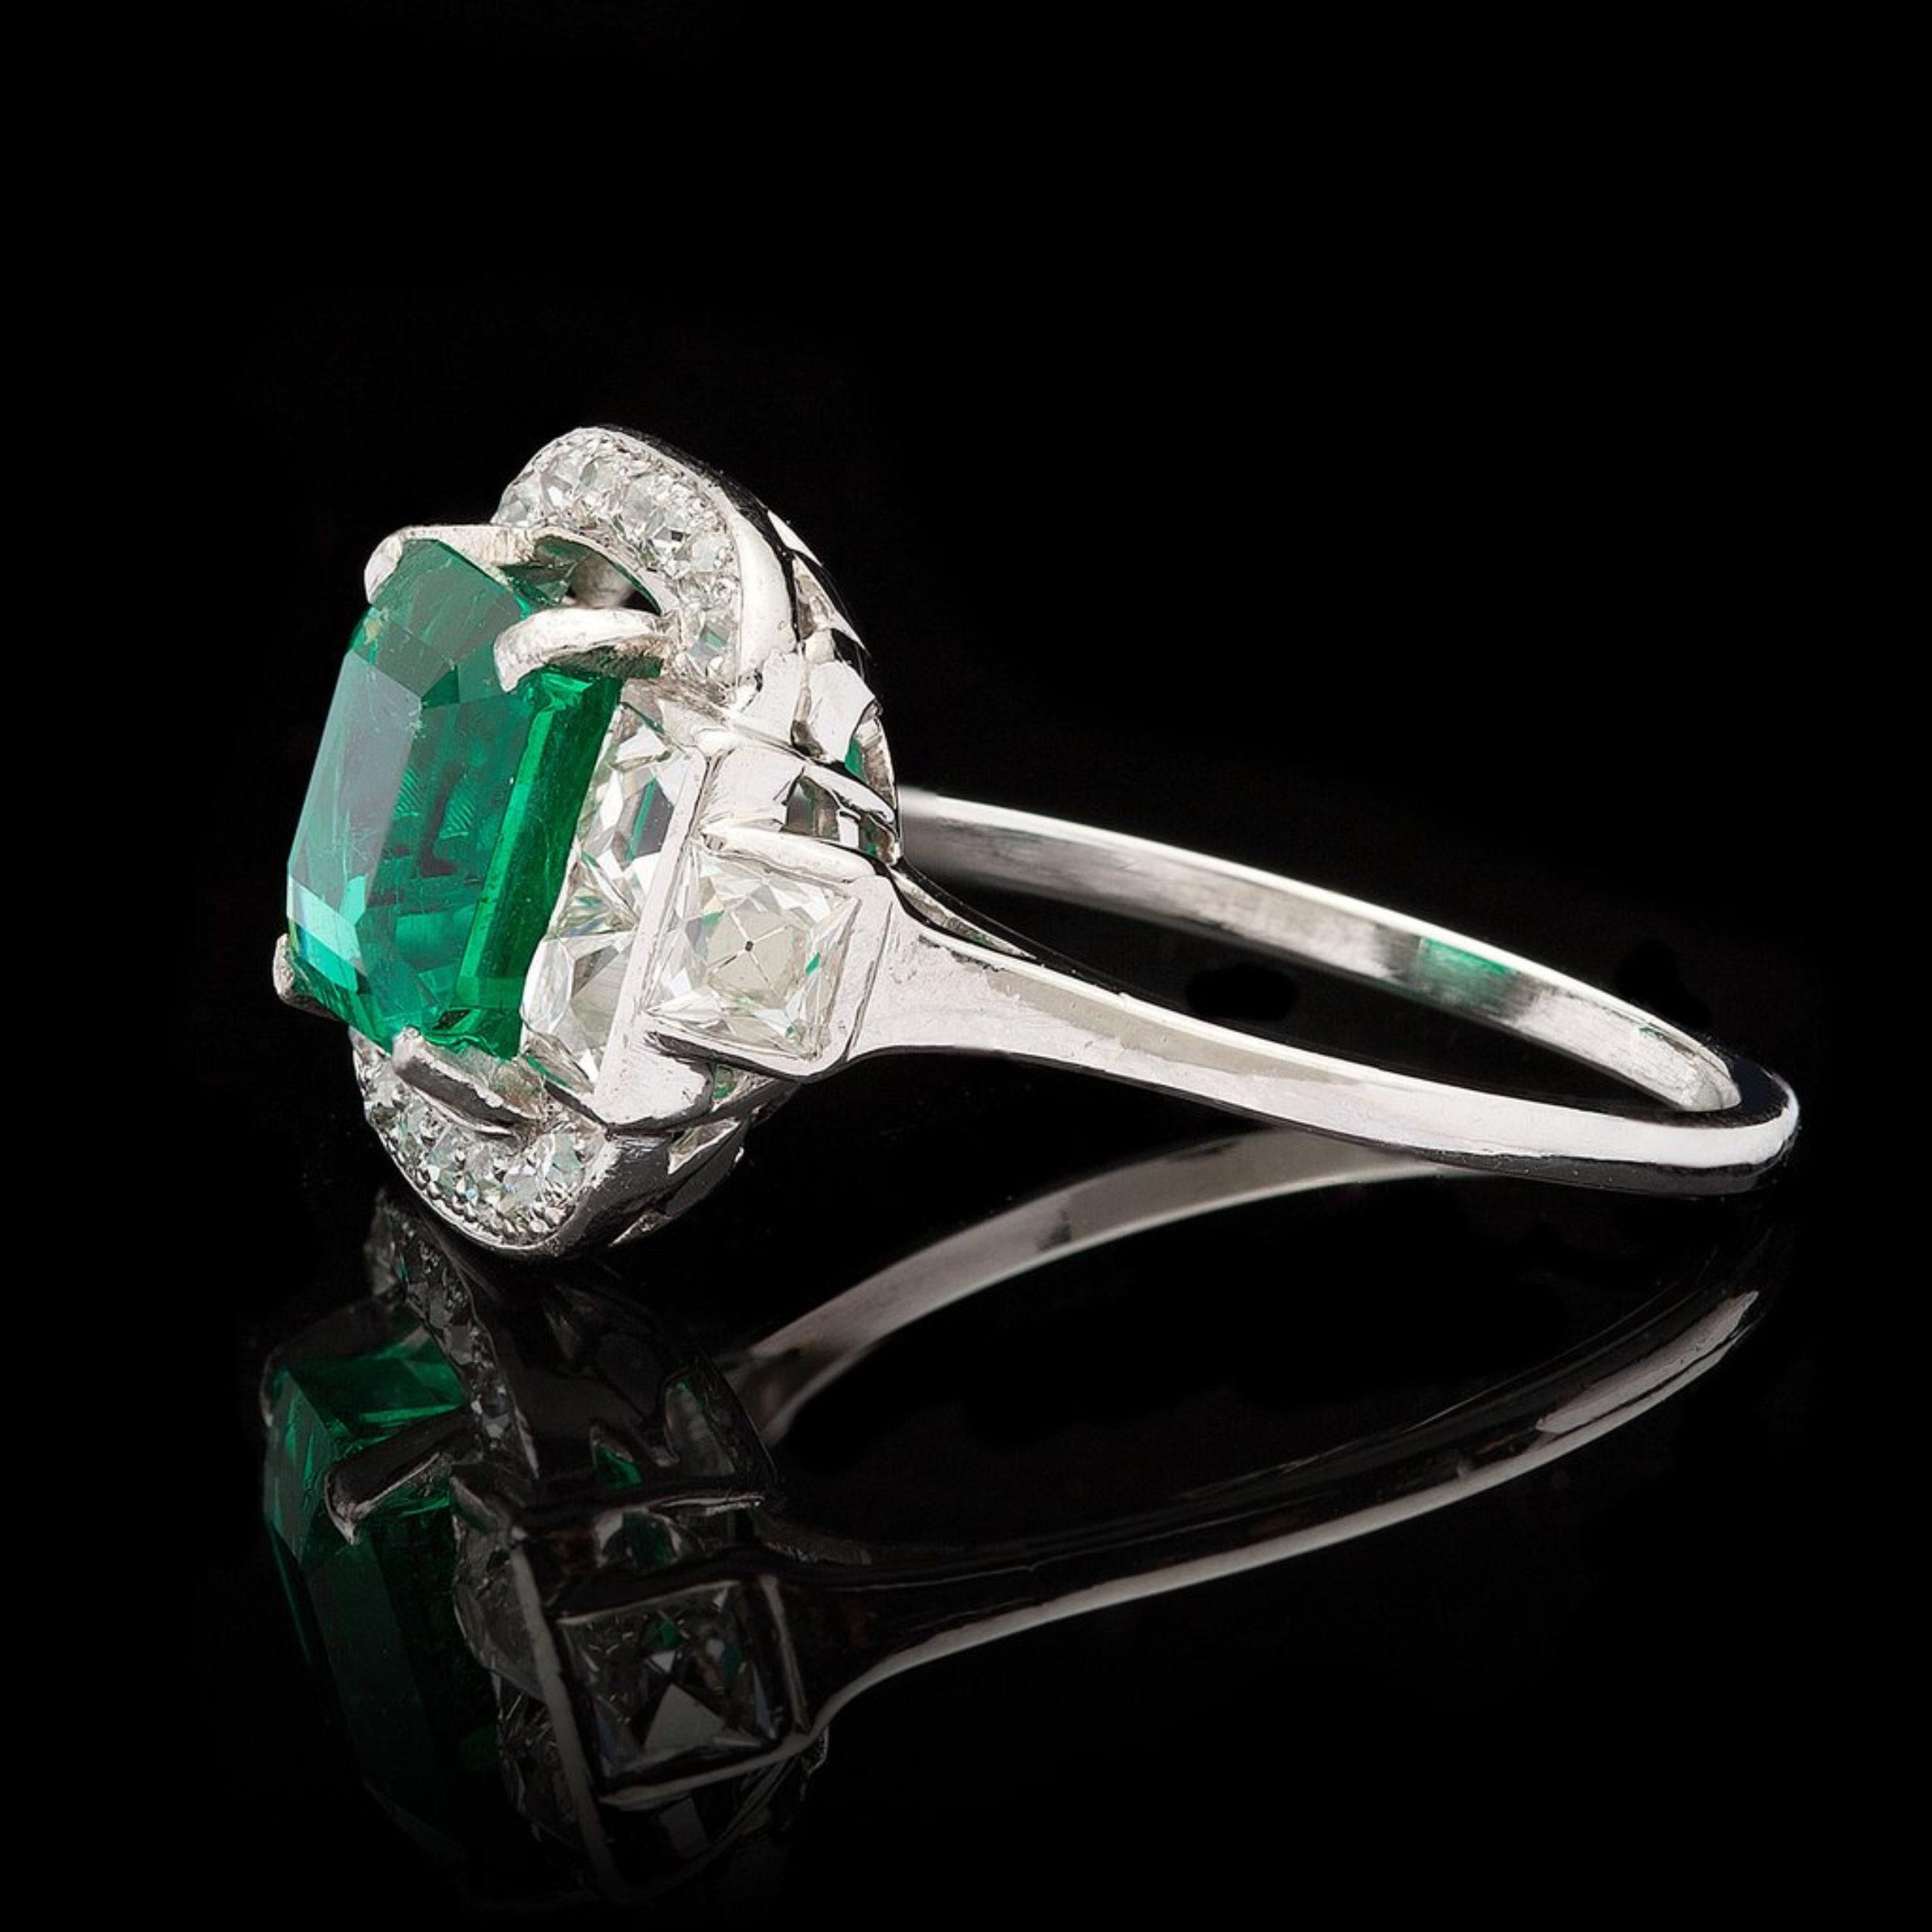 For Sale:  2 Carat Natural Colombian Emerald Engagement Ring White Gold Diamond Bridal Ring 2